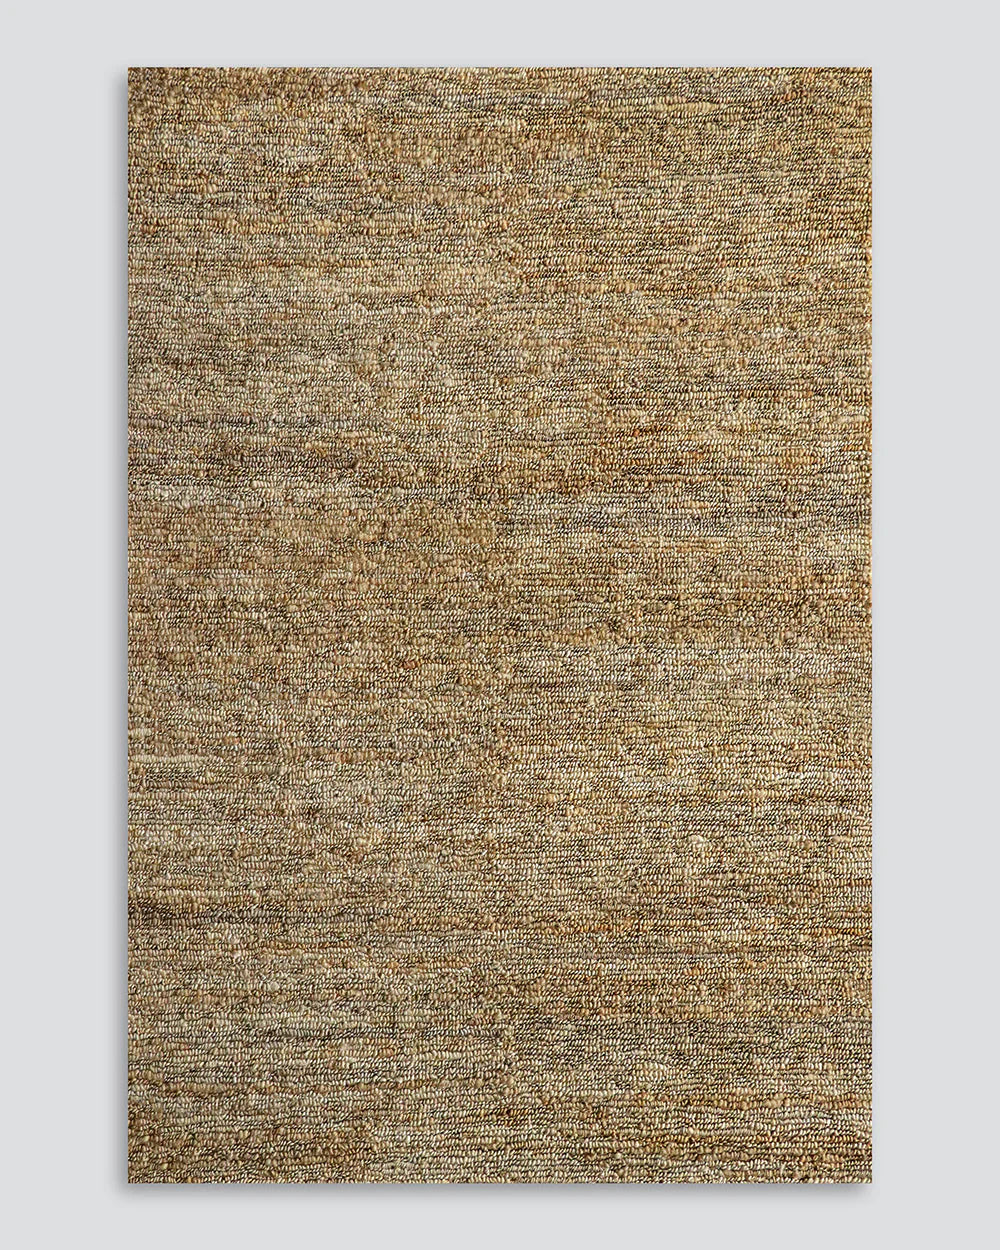 Madagascar Natural Brown Rug from Baya Furtex Stockist Make Your House A Home, Furniture Store Bendigo. Free Australia Wide Delivery. Mulberi Rugs.